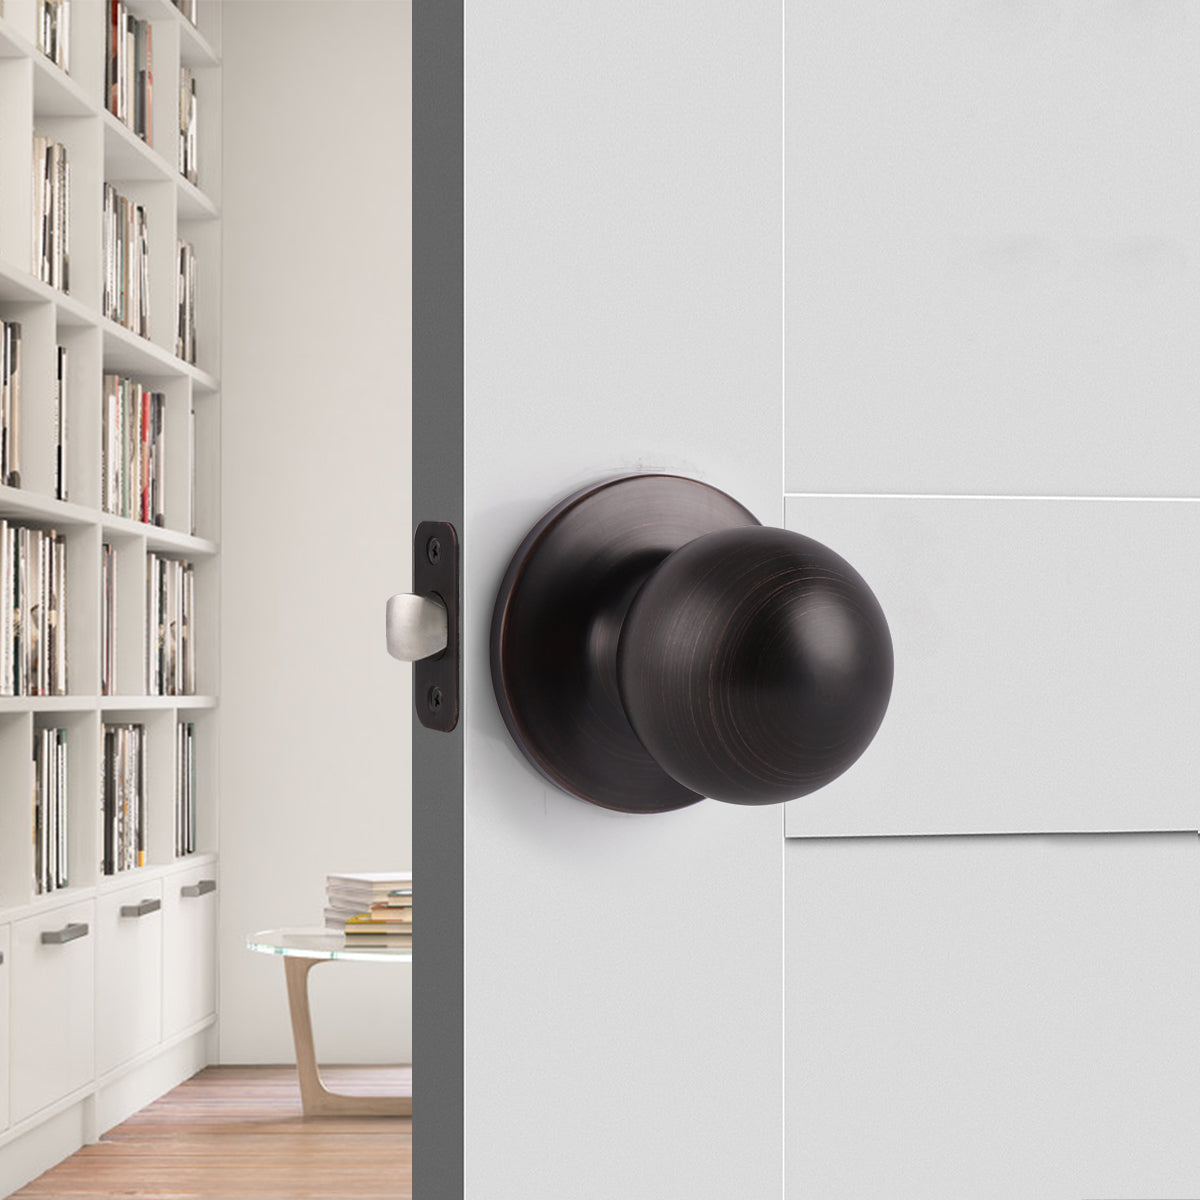 Single Connect Rod Round Ball Knobs Entry Lock /Privacy/Passage/Dummy Knob, Oil Rubbed Bronze Finish DL5763ORB - Probrico